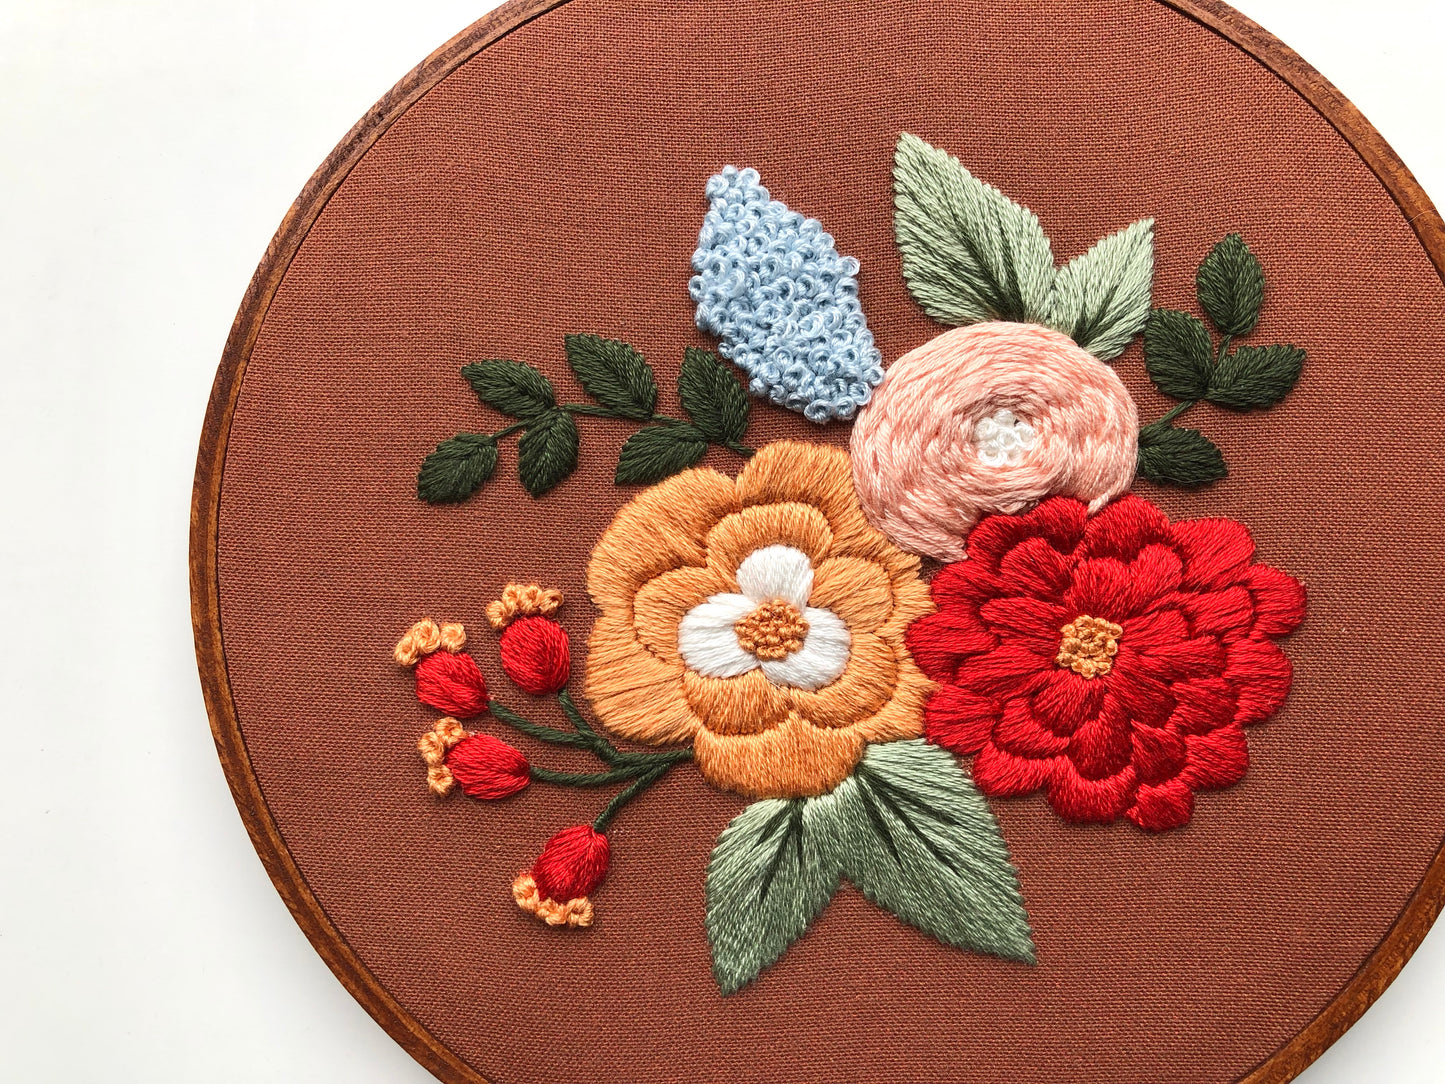 Hand Embroidery Kit - Hannah Rose in Rust